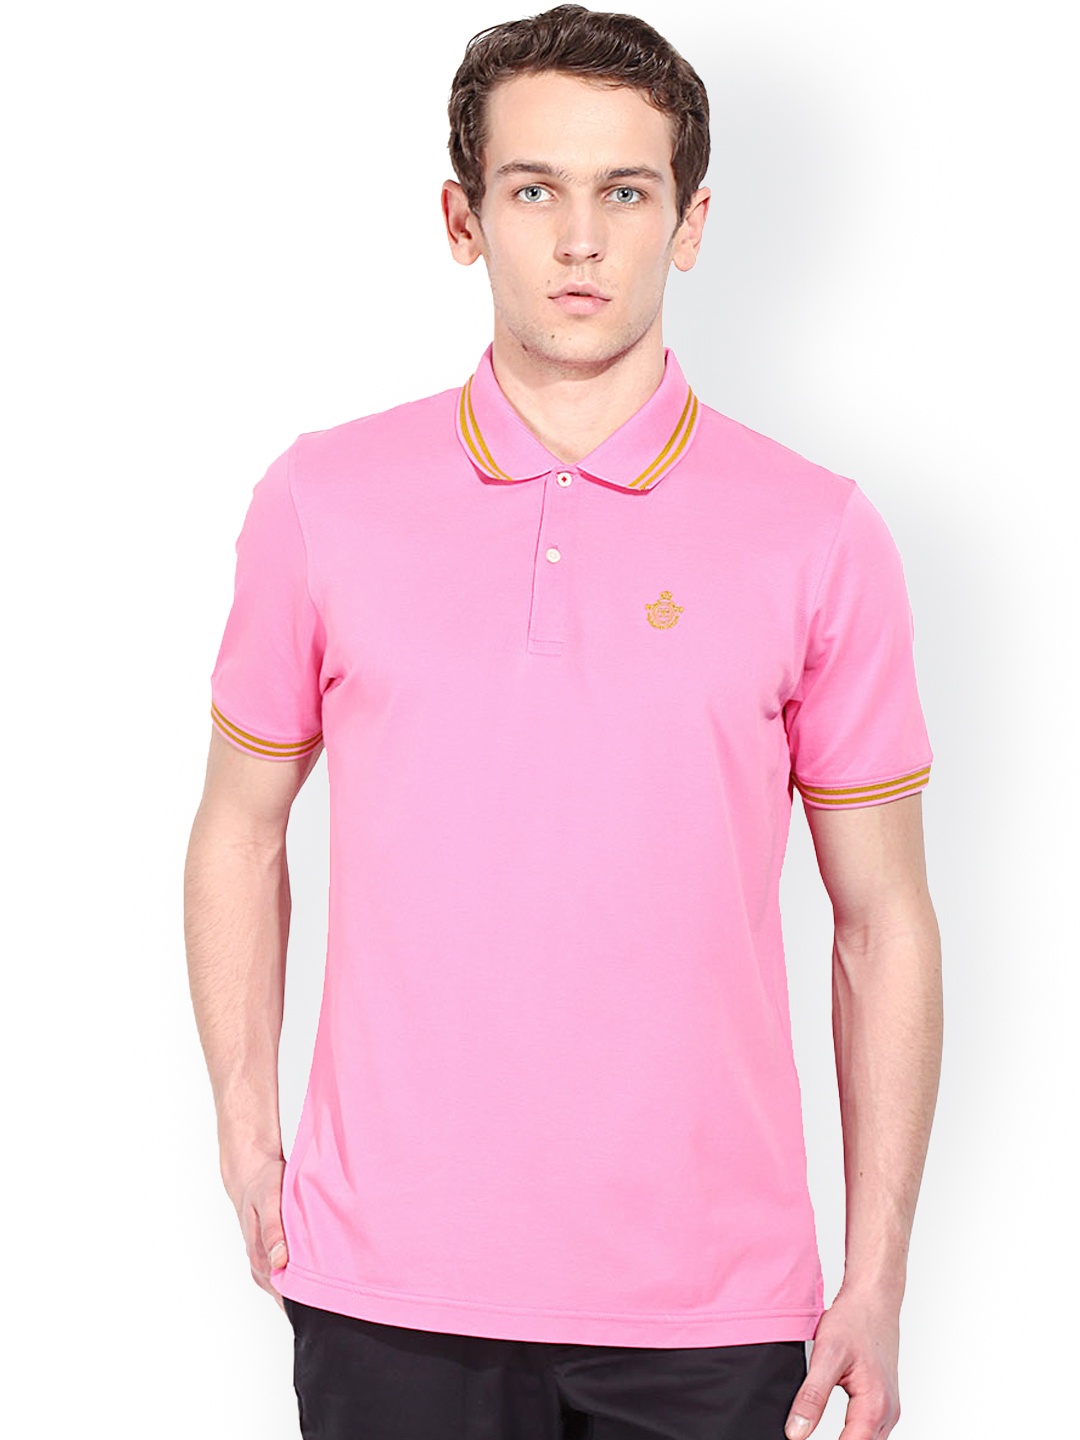 Blackberrys Pink Slim Fit Polo T-shirt price Myntra. T-shirts Deals at ...